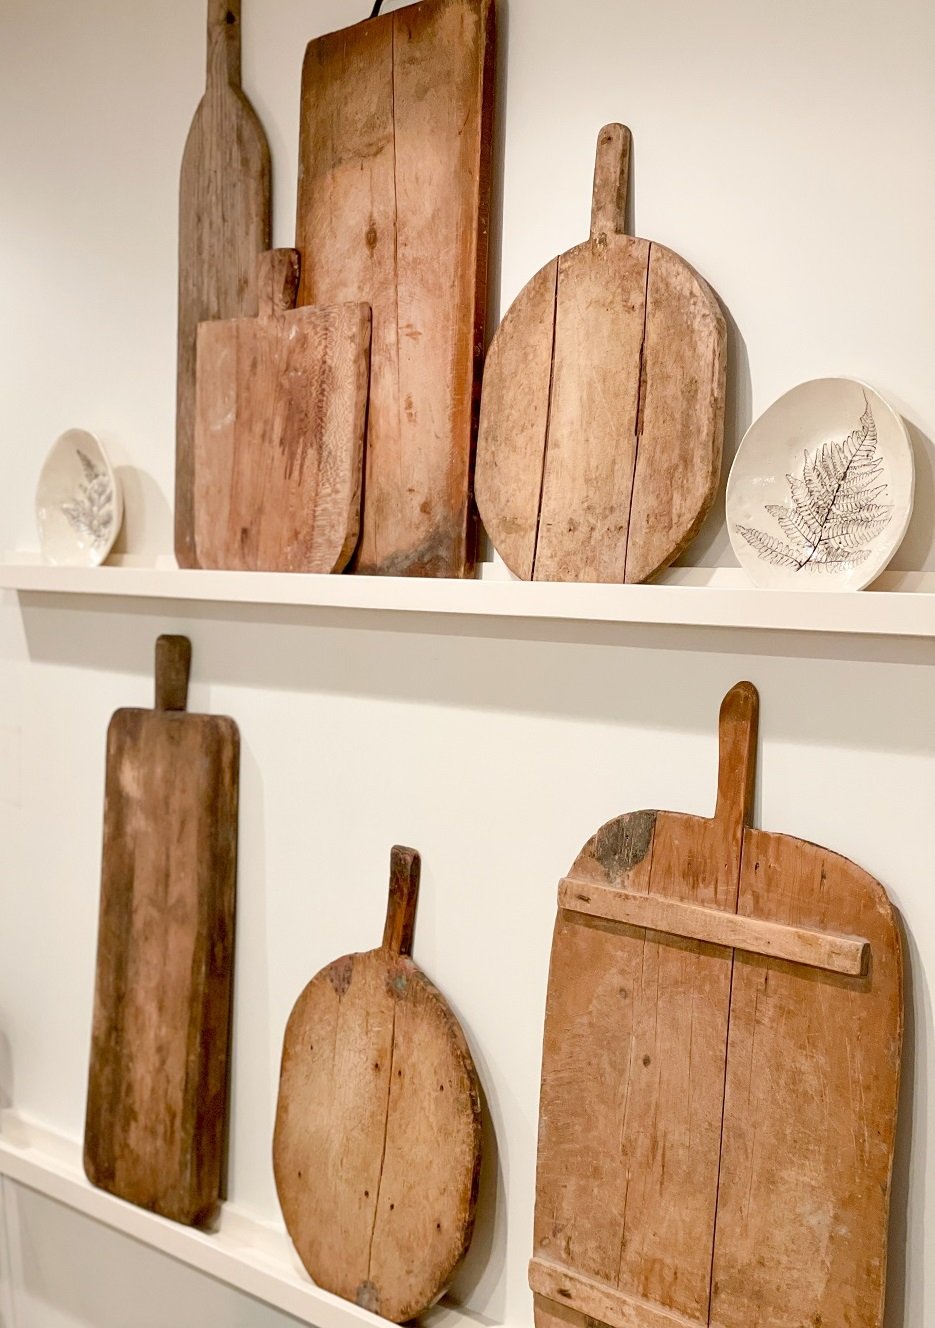 How to Display Antique Breadboards